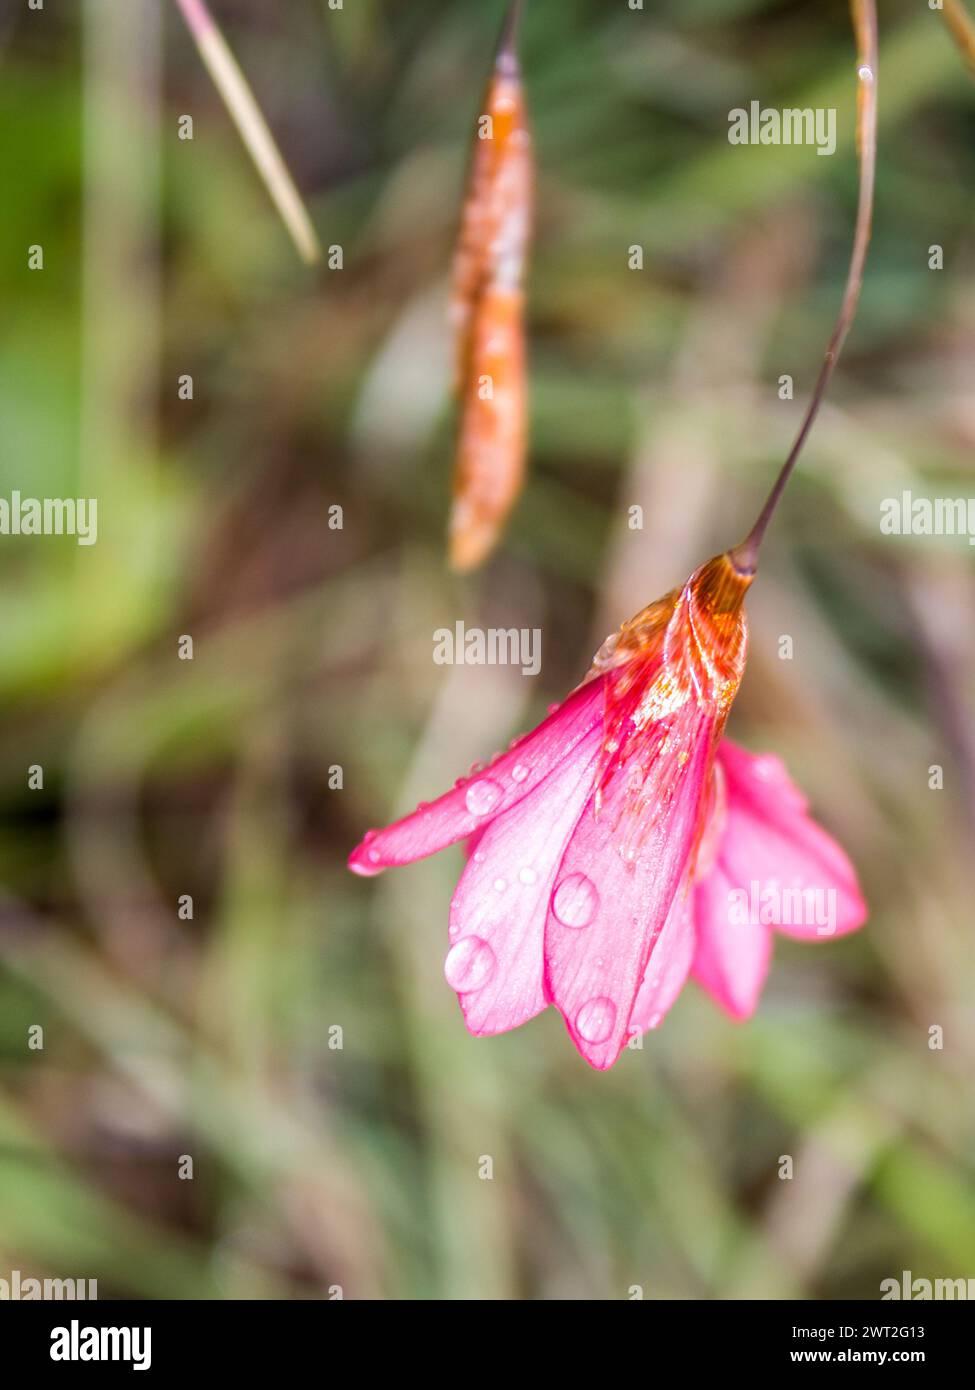 A delicate pink wildflower in the Drakensberg Mountains covered in water droplets Stock Photo